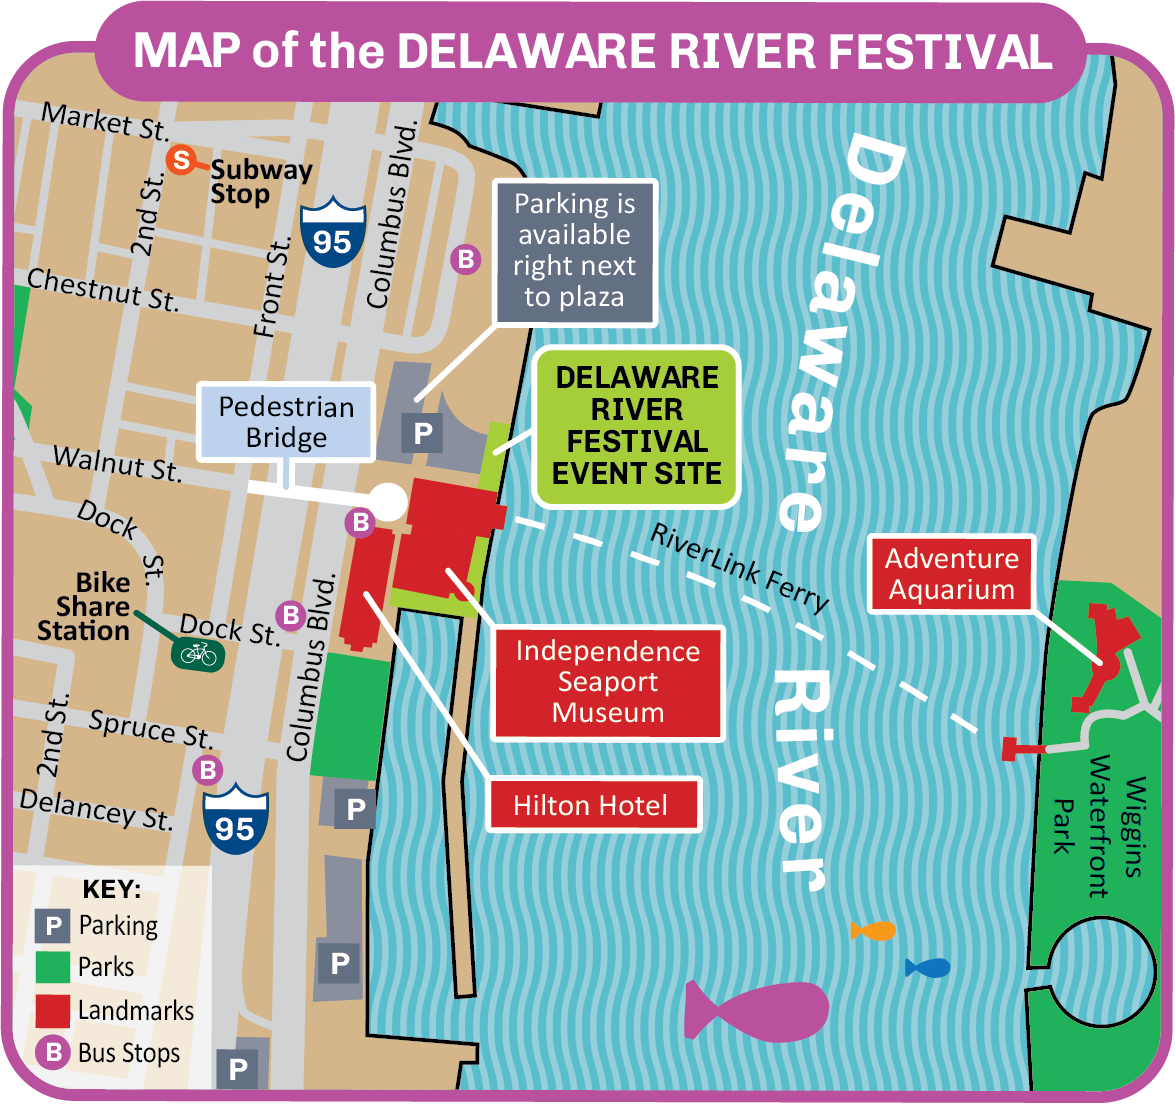 Map of the Delaware River Festival - spanning both sides of the river, the festival is mostly on the Philadelphia side at Penn's Landing, accessible via the Pedestrian Bridge at Walnut St, a nearby subway stop at 2nd and Market, and by car with several parking lots nearby, including right next to the Independence Seaport Museum. The RiverLink Ferry connects you to the New Jersey side of the Festival at Wiggins Waterfront Park and Adventure Aquarium.